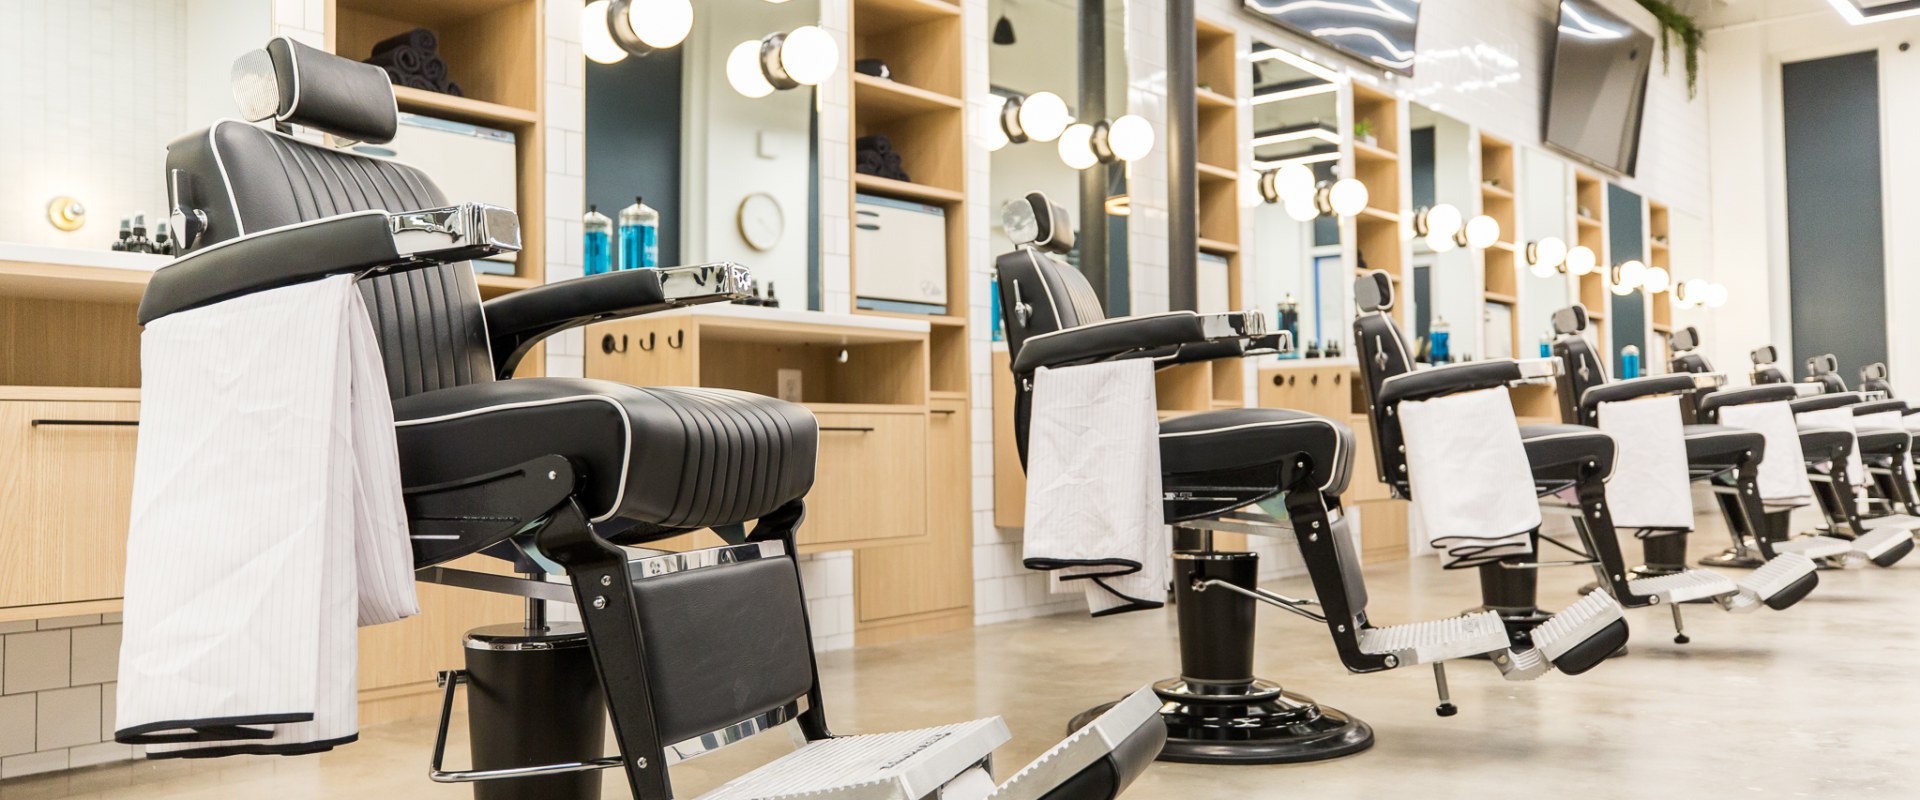 Trendsetting Barber Shops In Washington DC You Need To Visit